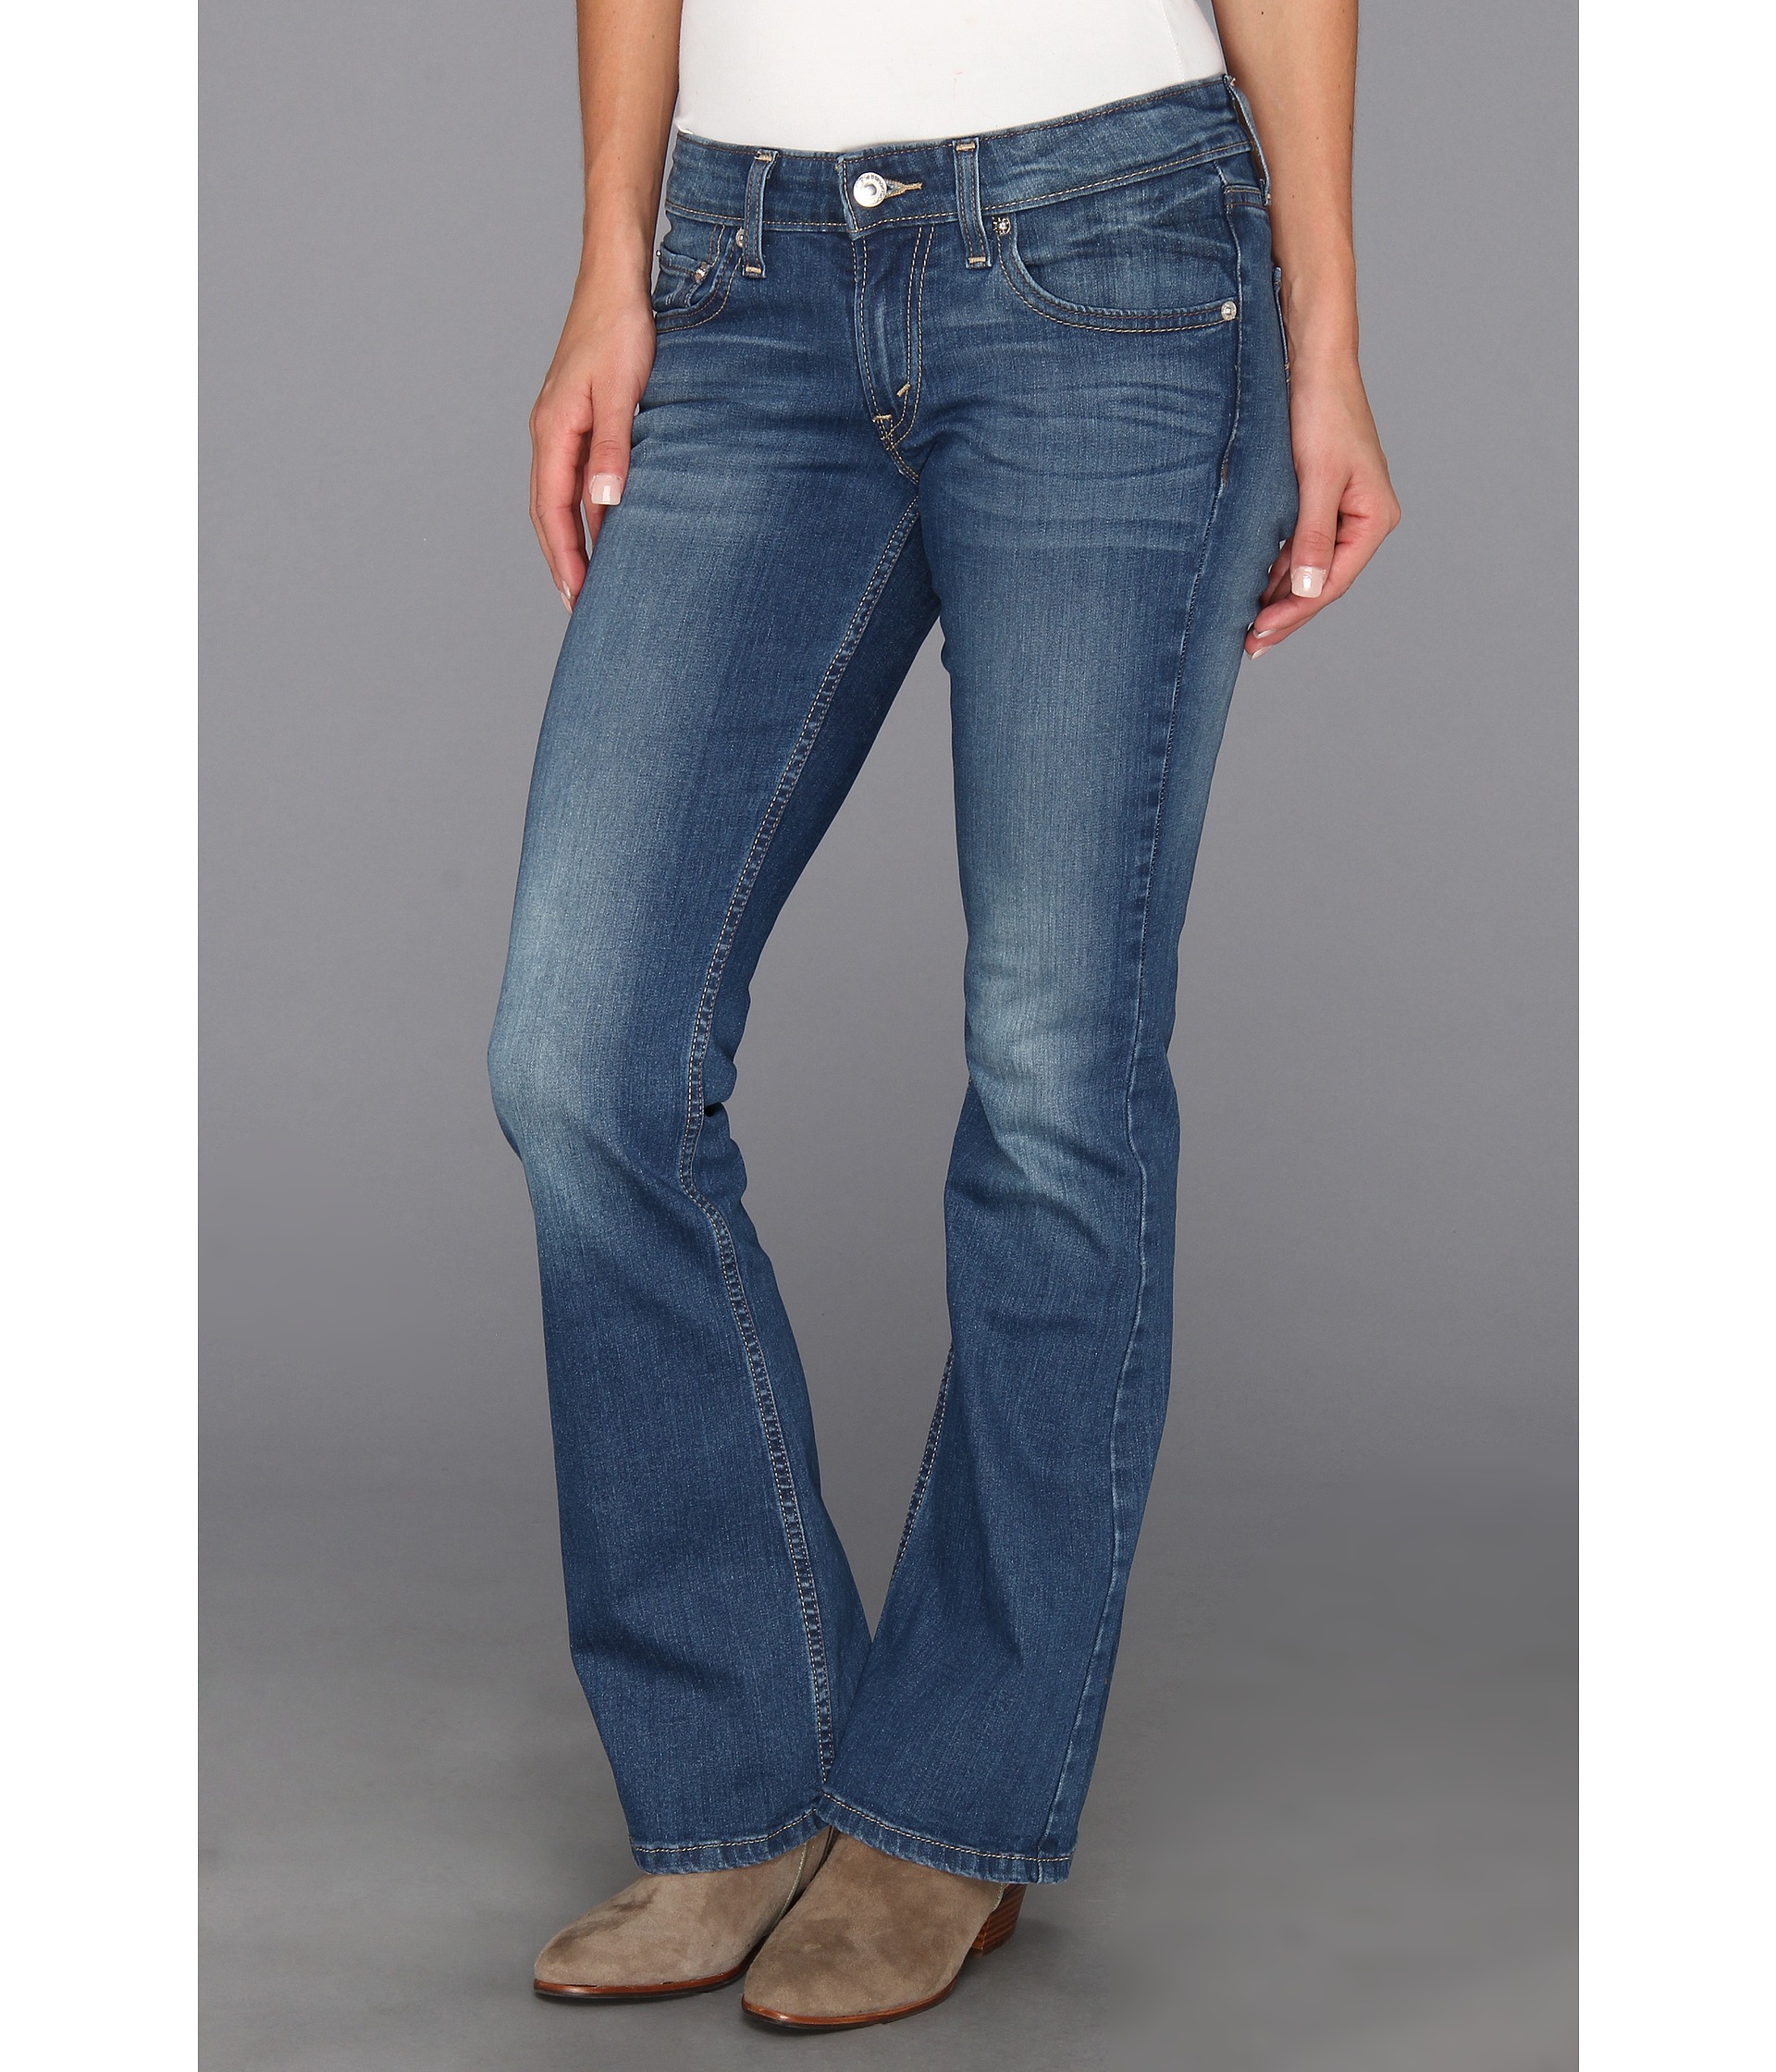 Levis Juniors 518 Superlow Boot Cut | Shipped Free at Zappos